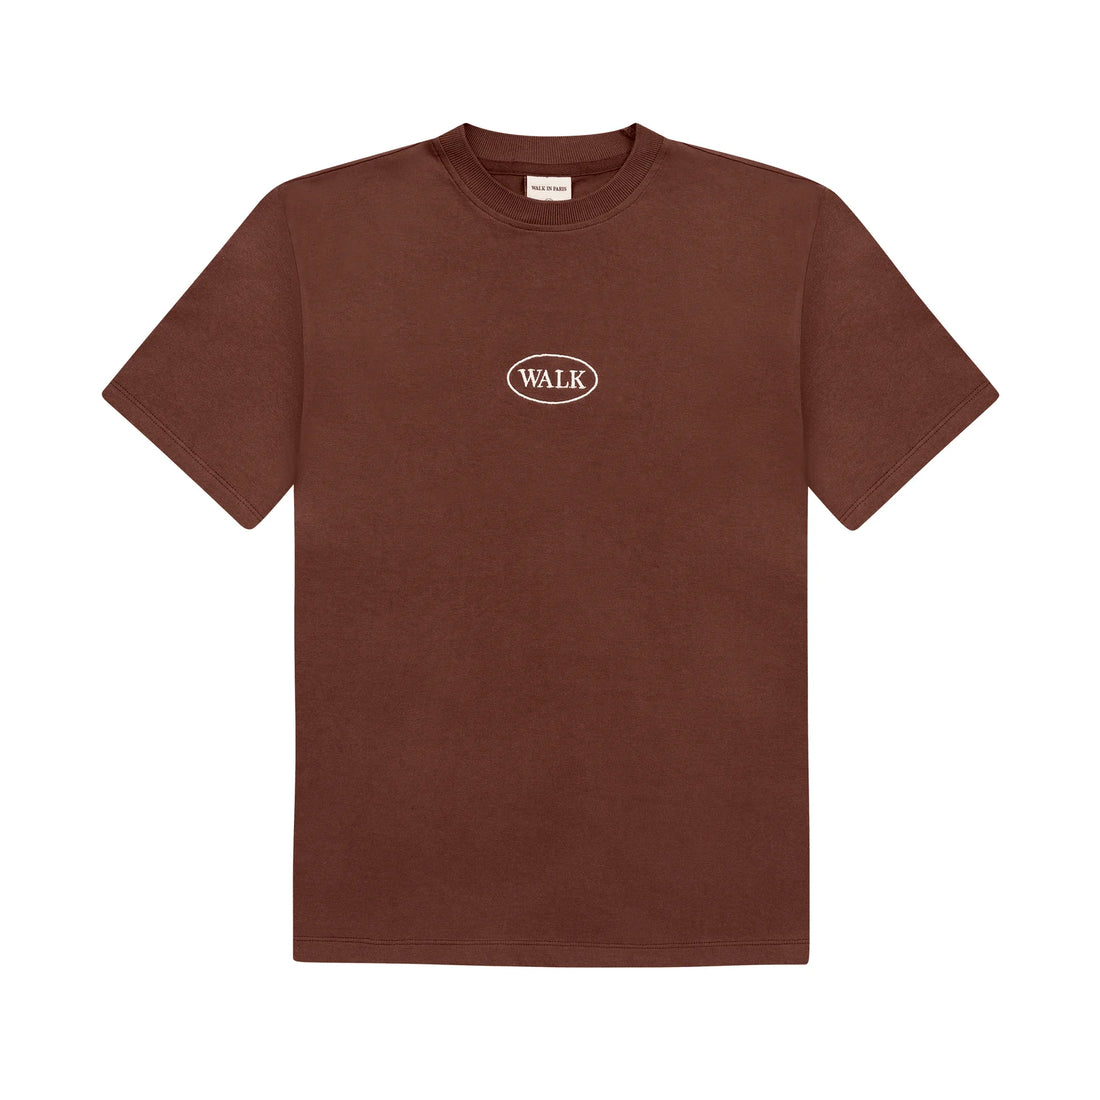 THE BROWN T-SHIRT